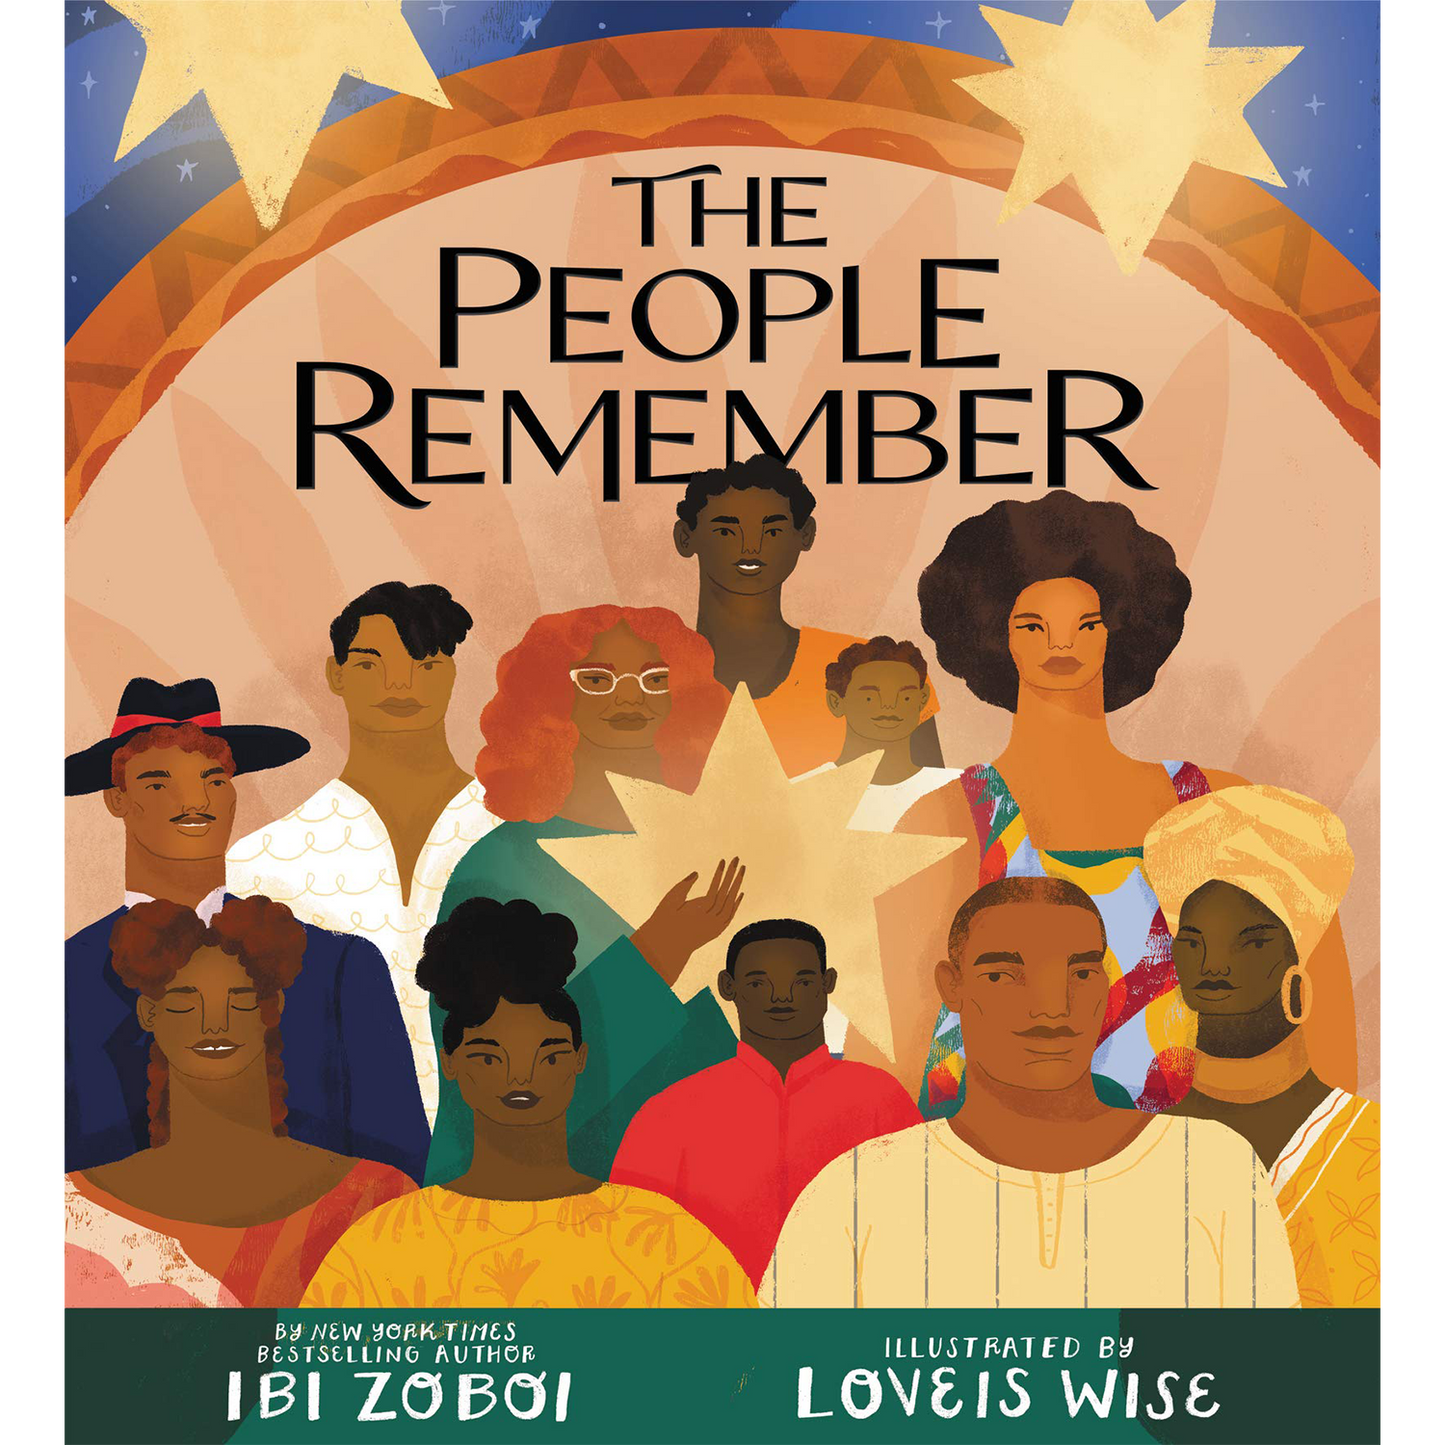 The People Remember (Hardcover)